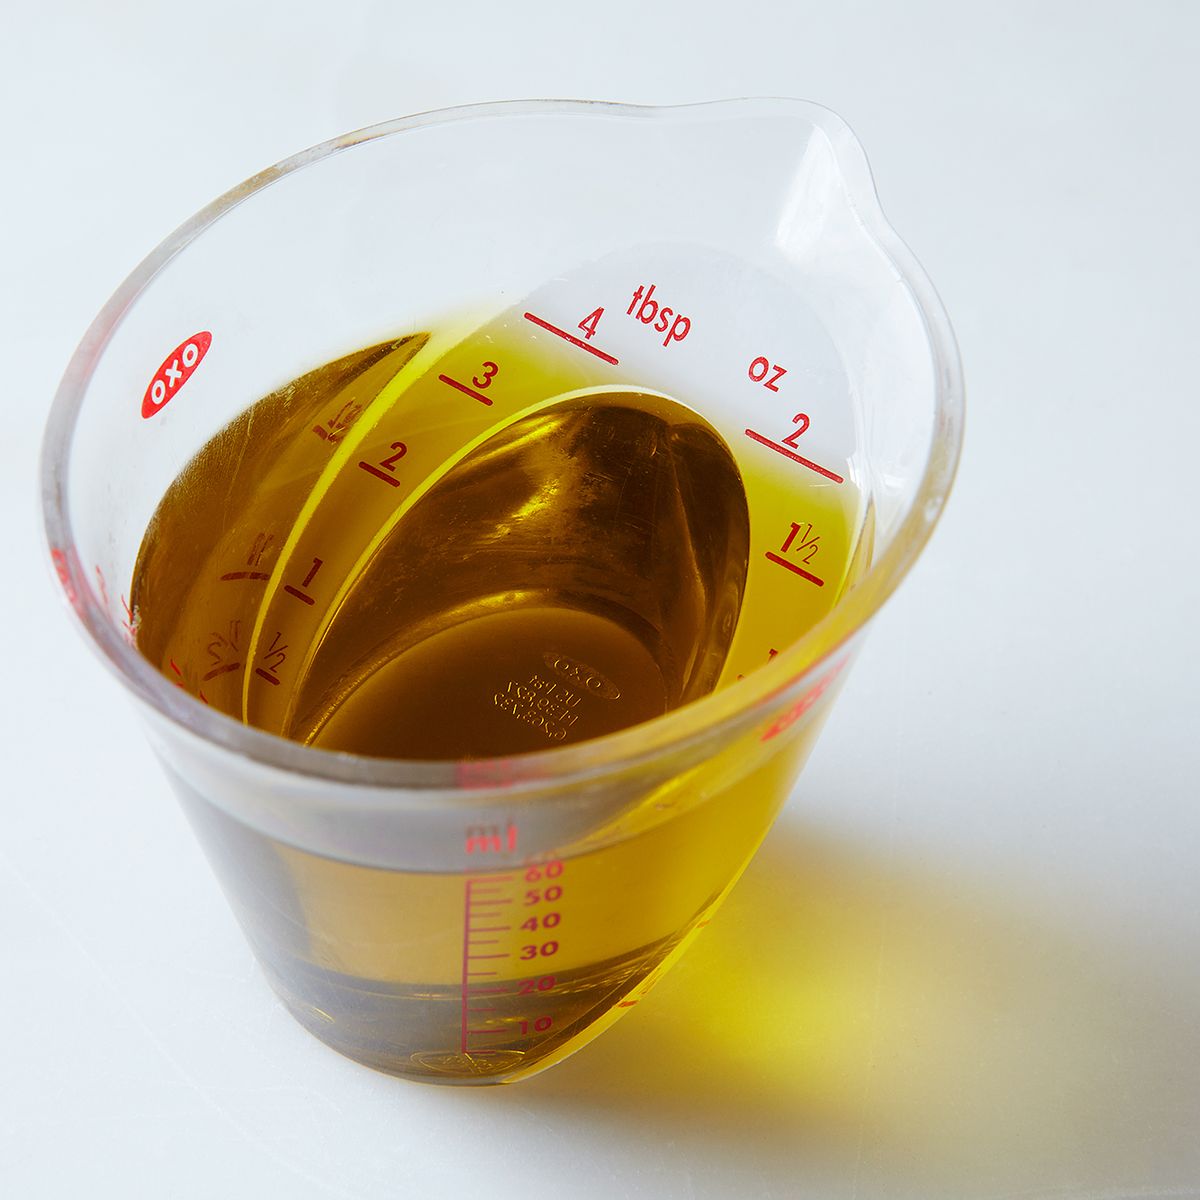 Julia Turshen Gives the Humble 1/4-Cup Measure Its Due